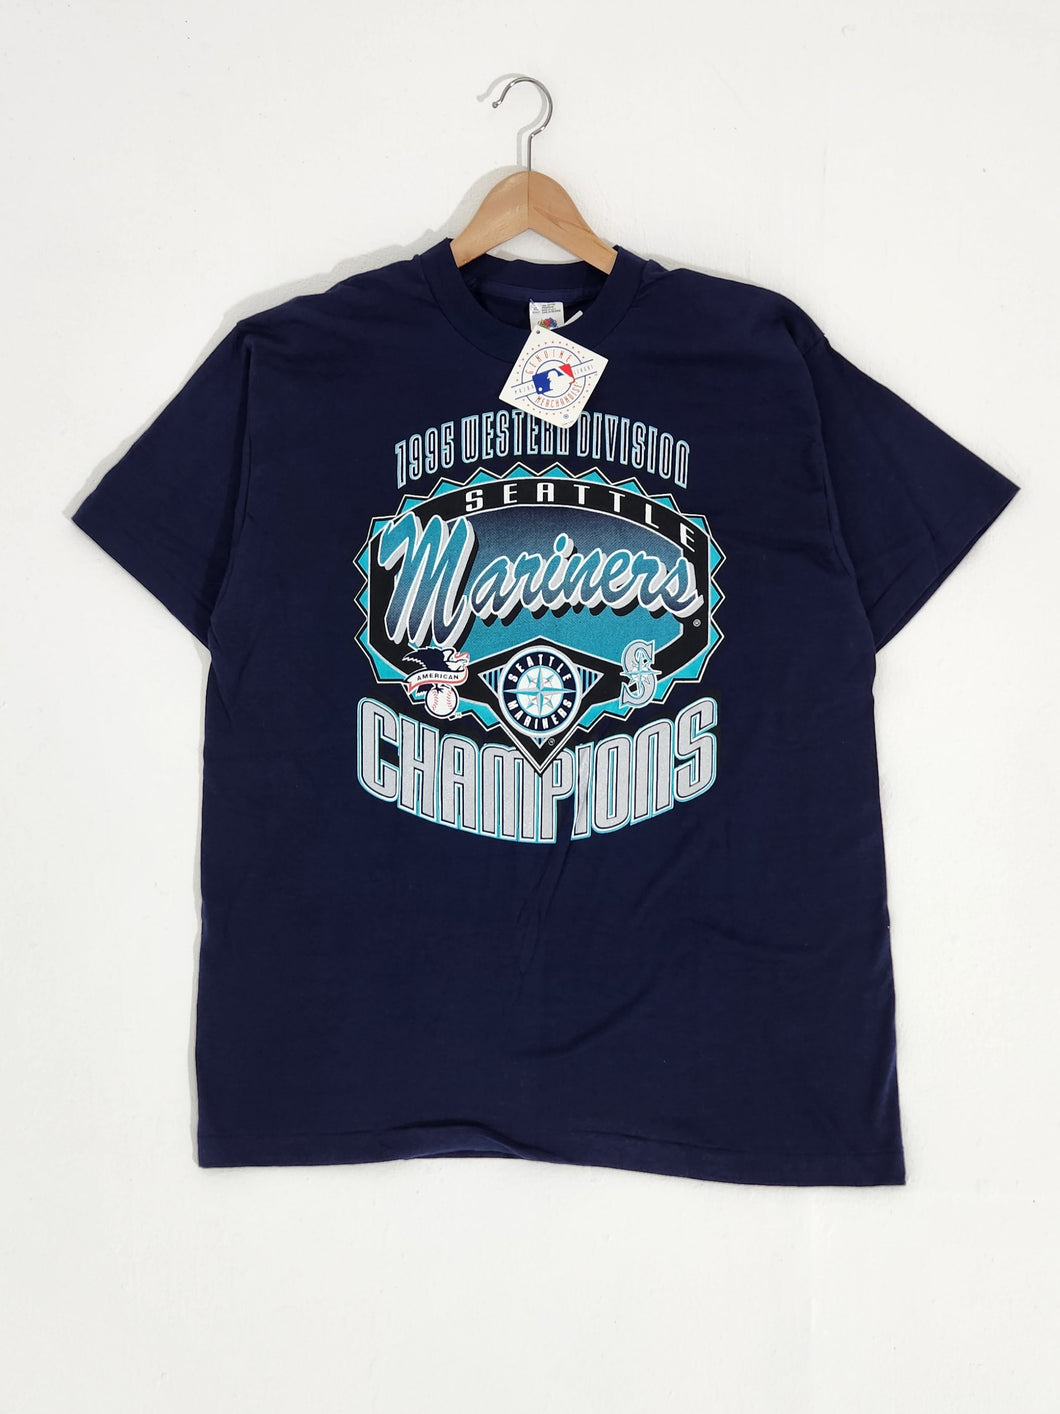 Vintage 1990's MLB NWT Seattle Mariners 1995 Western Division Champs T-Shirt Sz. XL